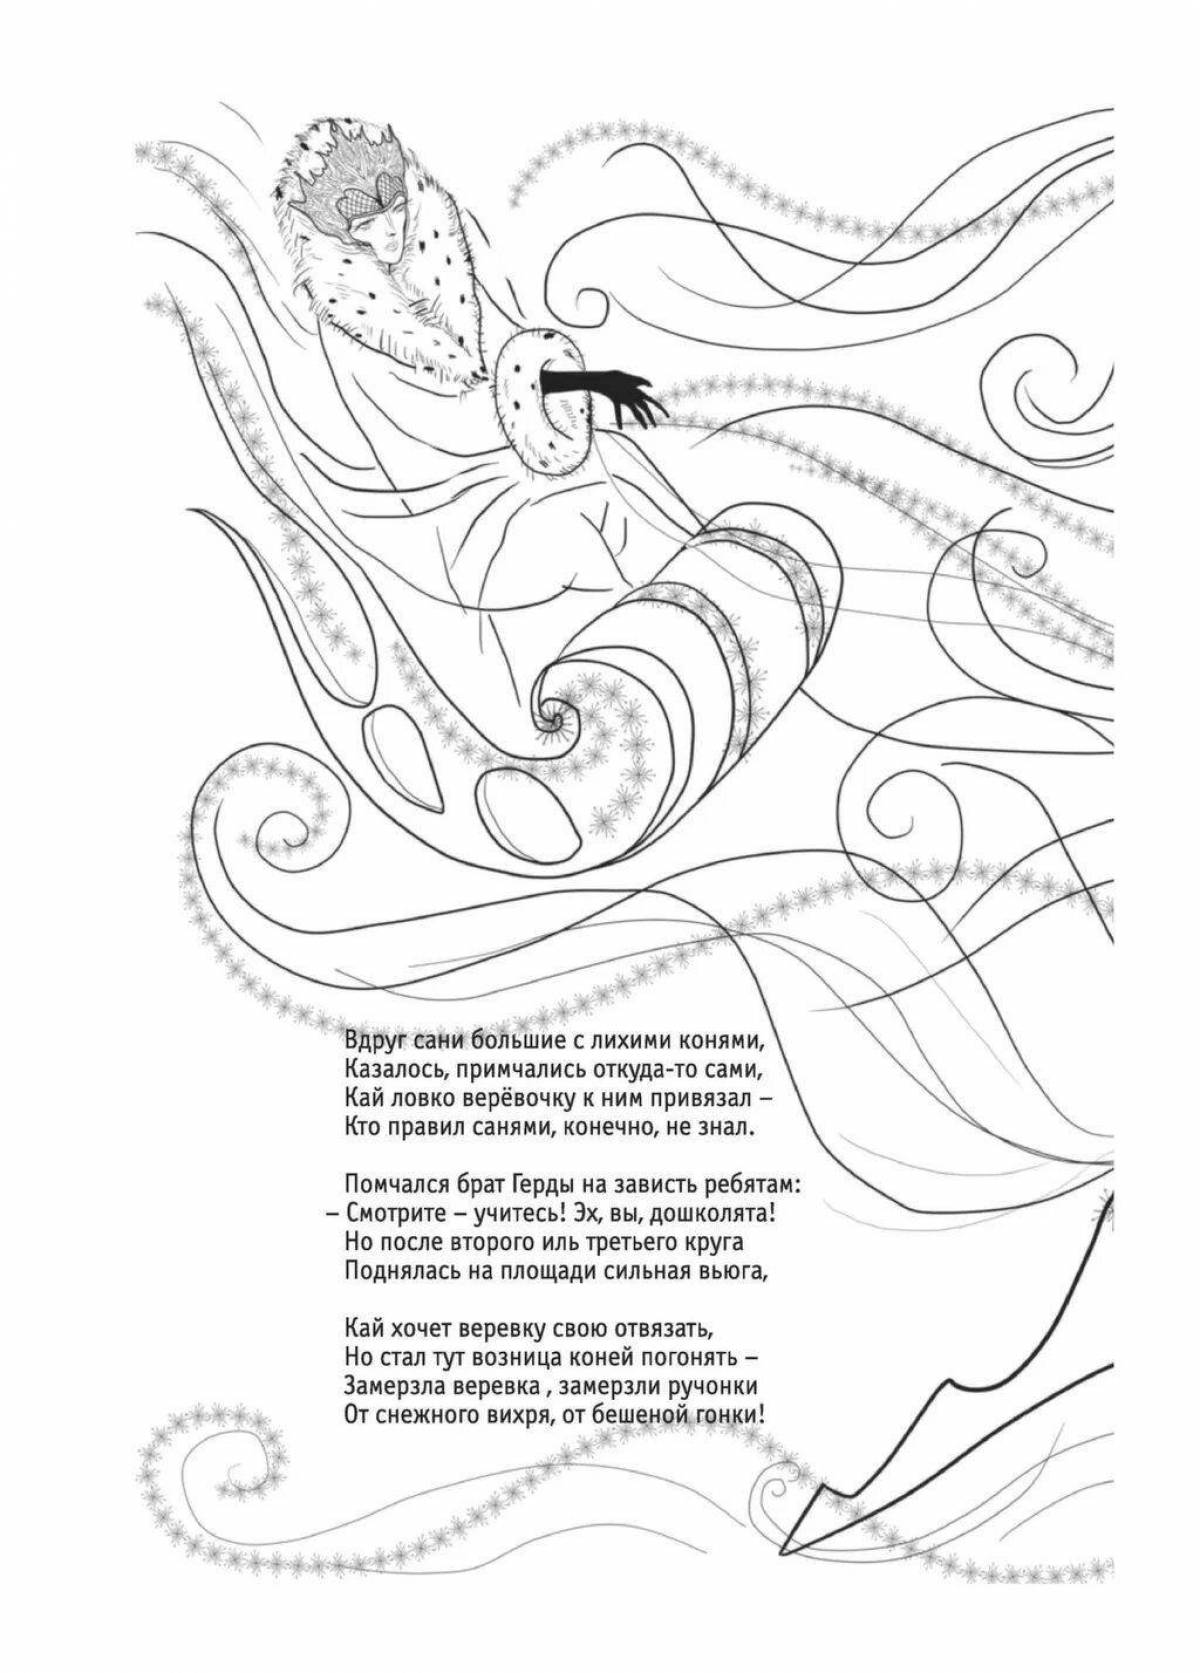 Amazing blizzard coloring book for kids